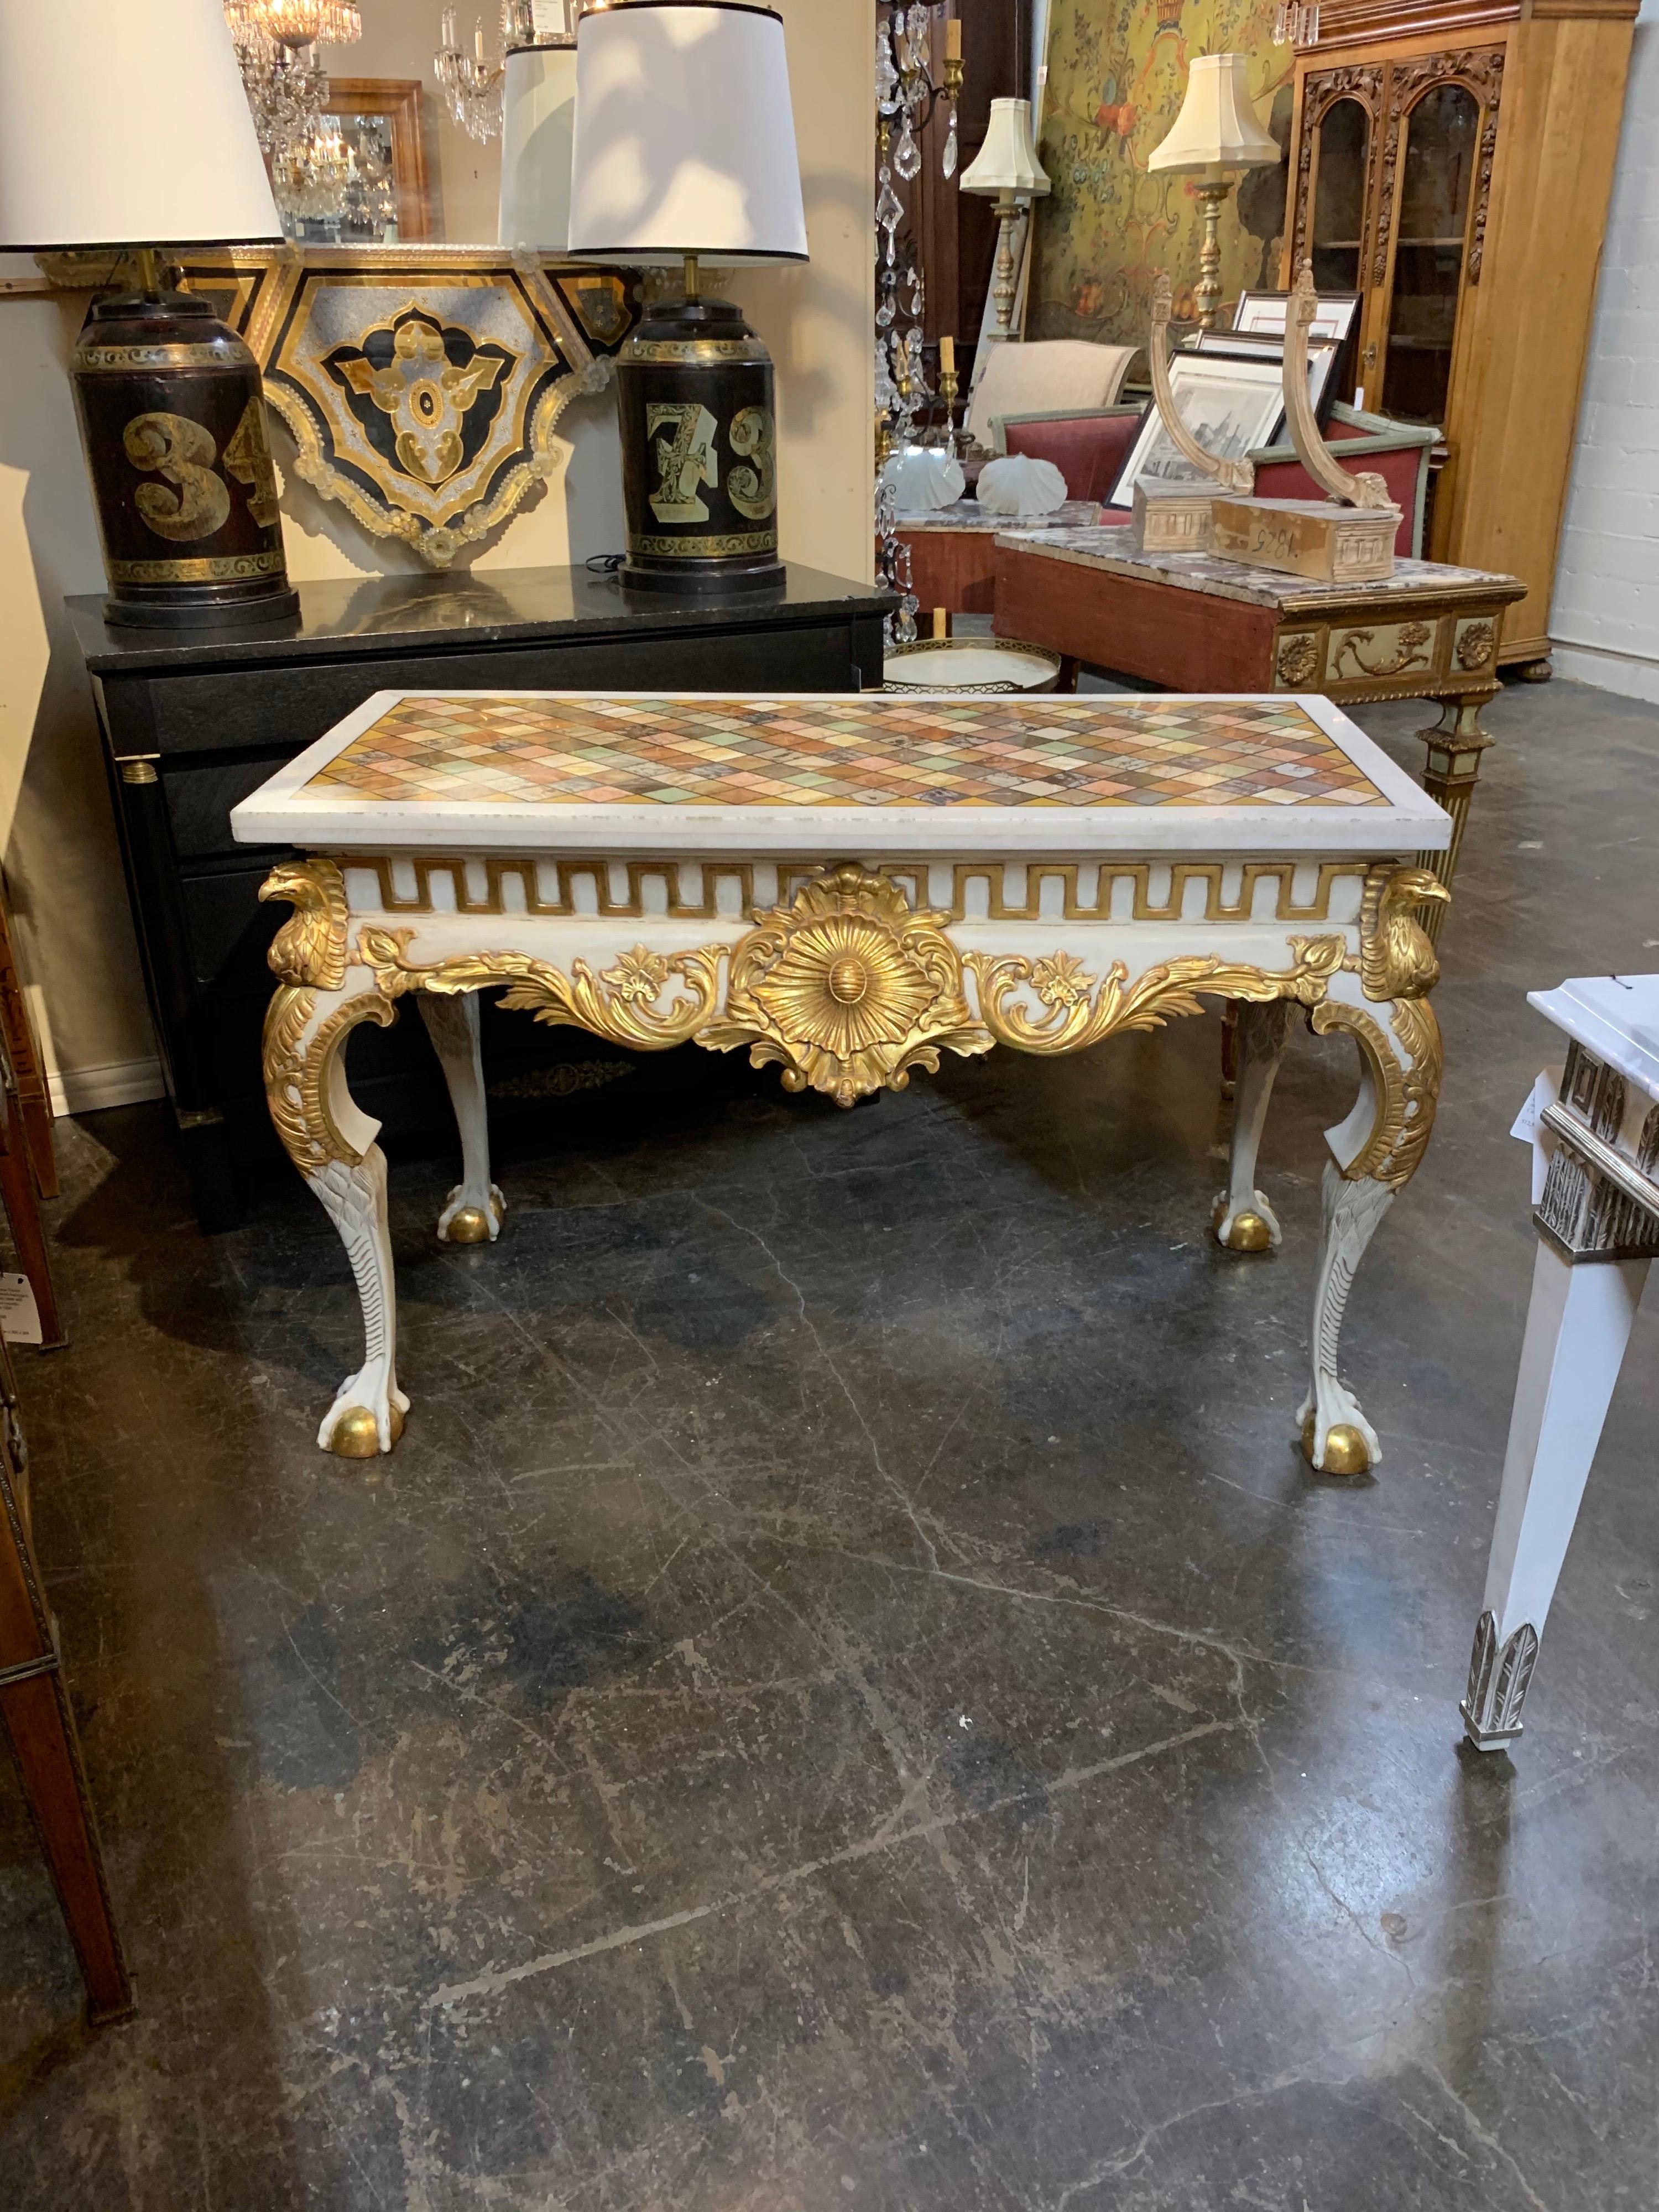 Very fine Italian carved and parcel-gilt console with specimen marble top. Beautiful gilt and interesting carvings. Creates a very dramatic look!